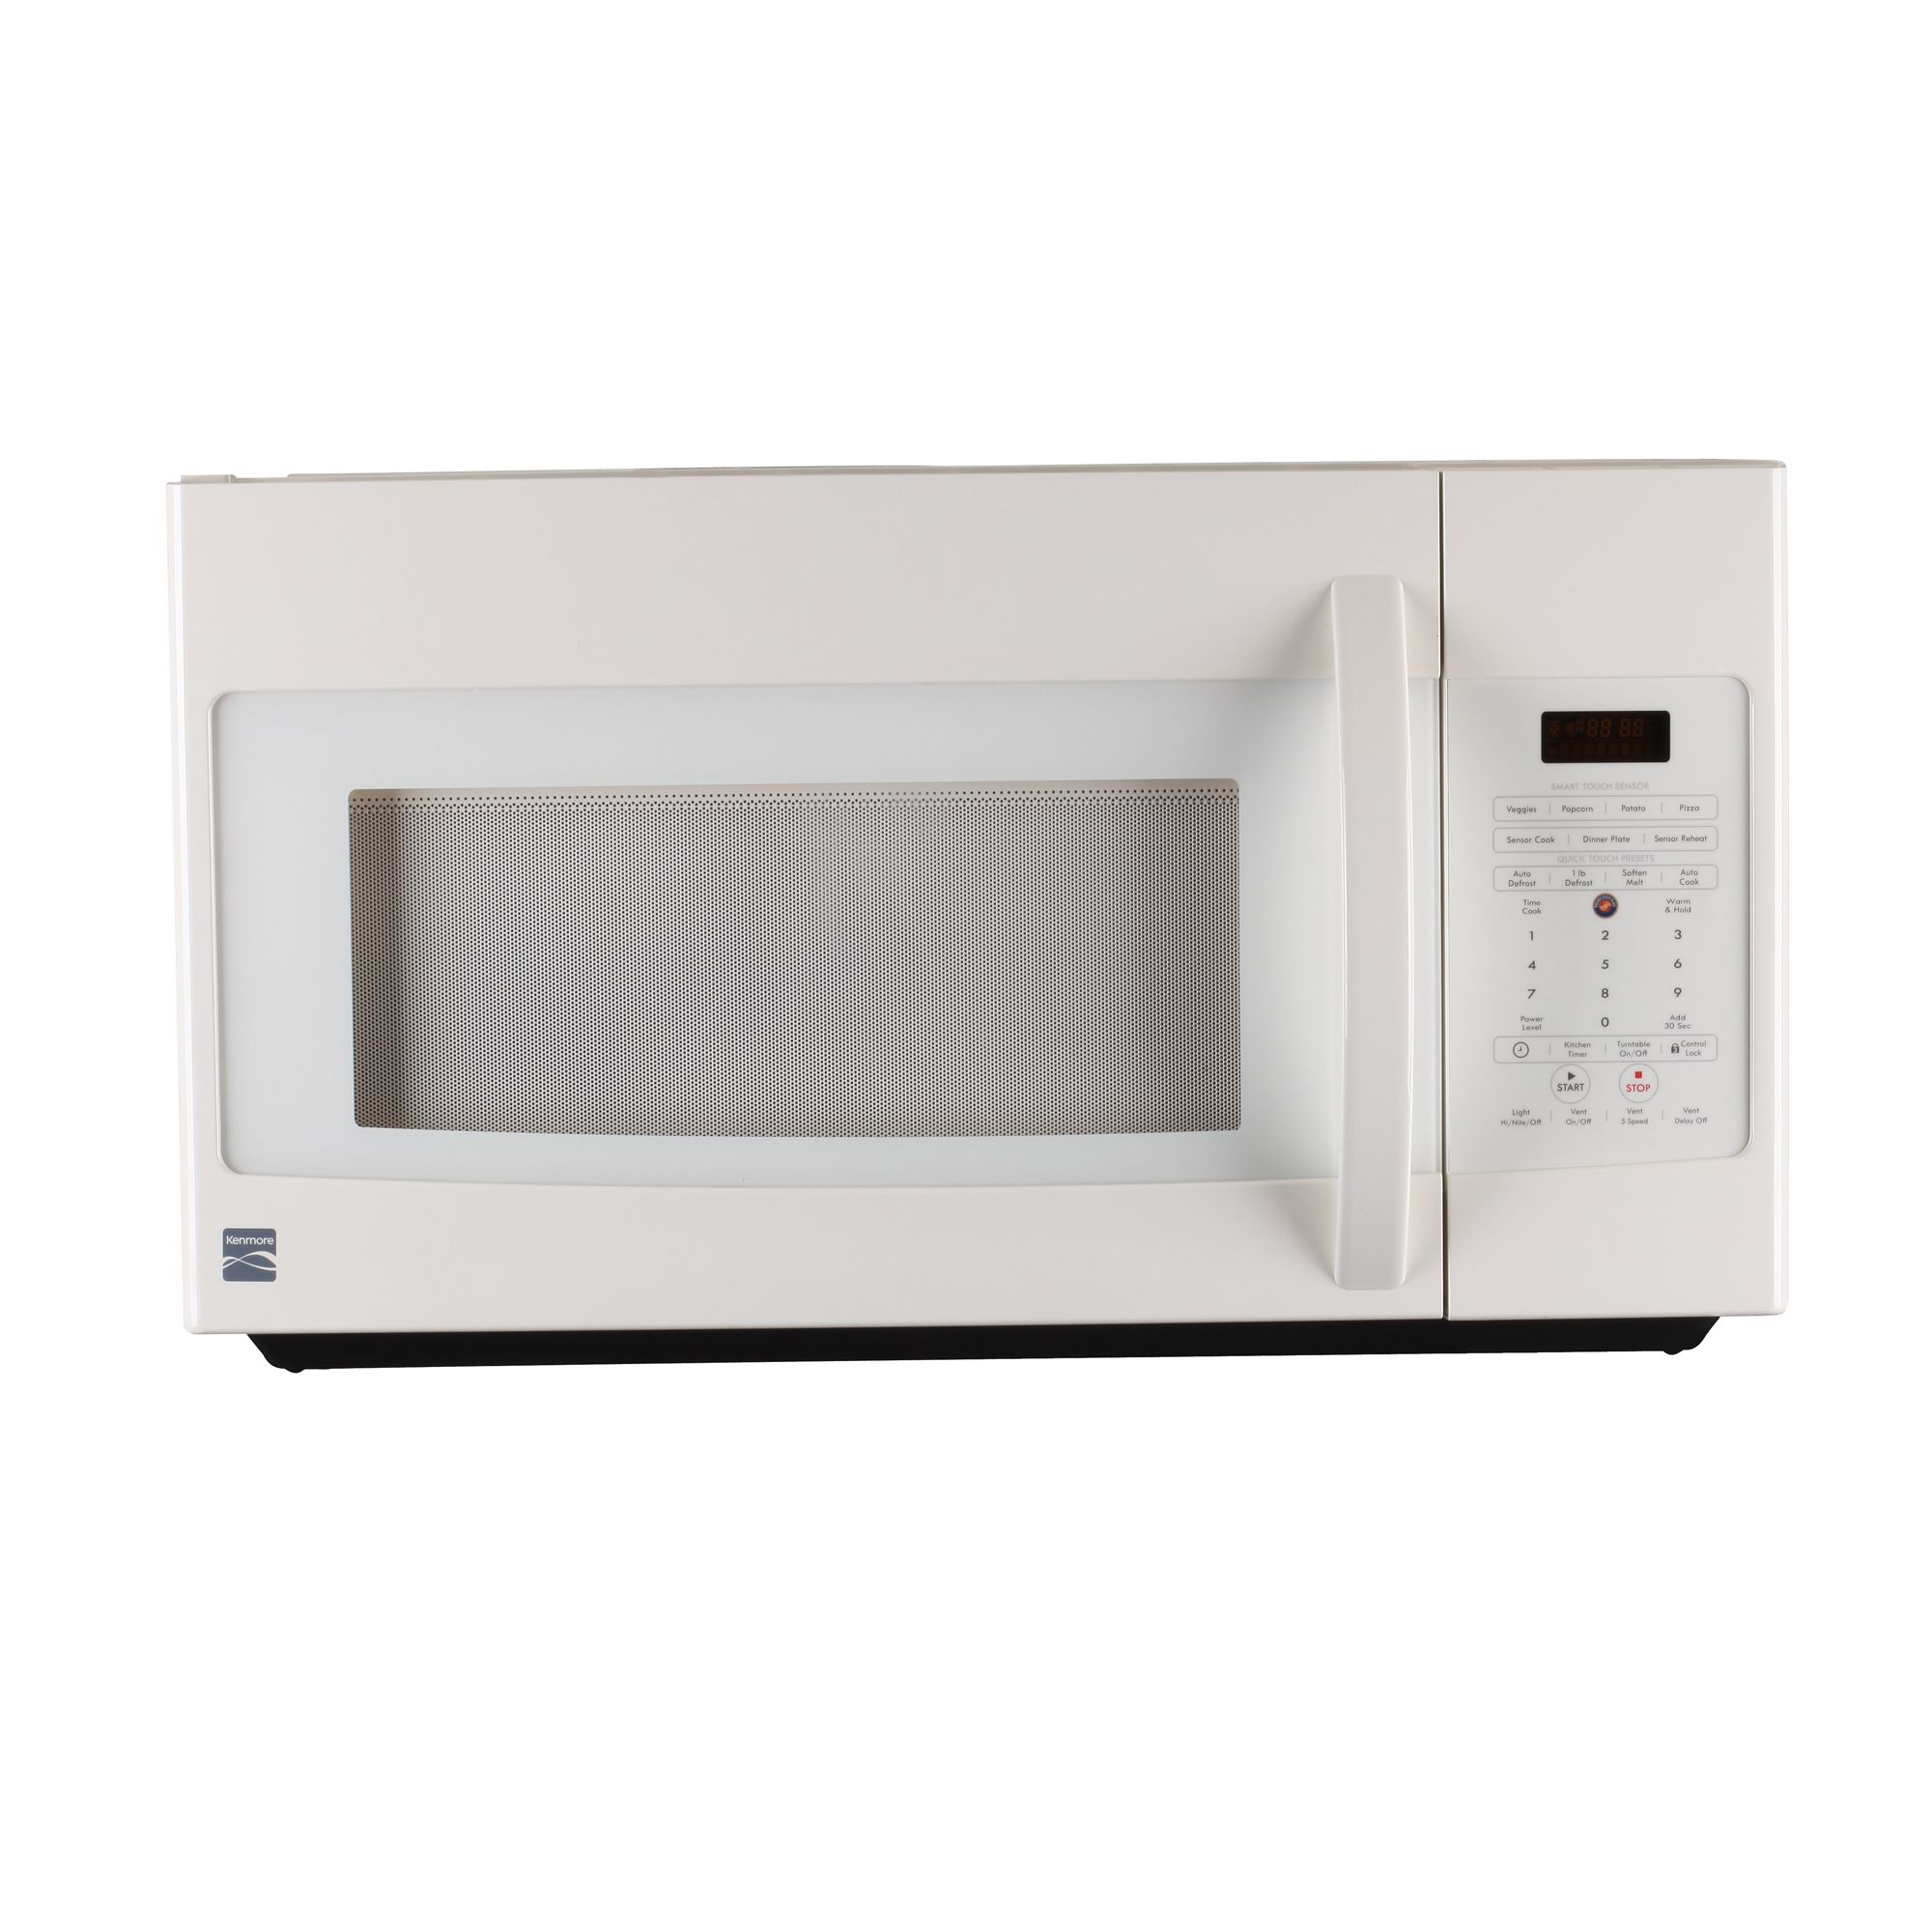 Kenmore Over the Range Microwave 2.0 cu. ft. 85064 - Sears